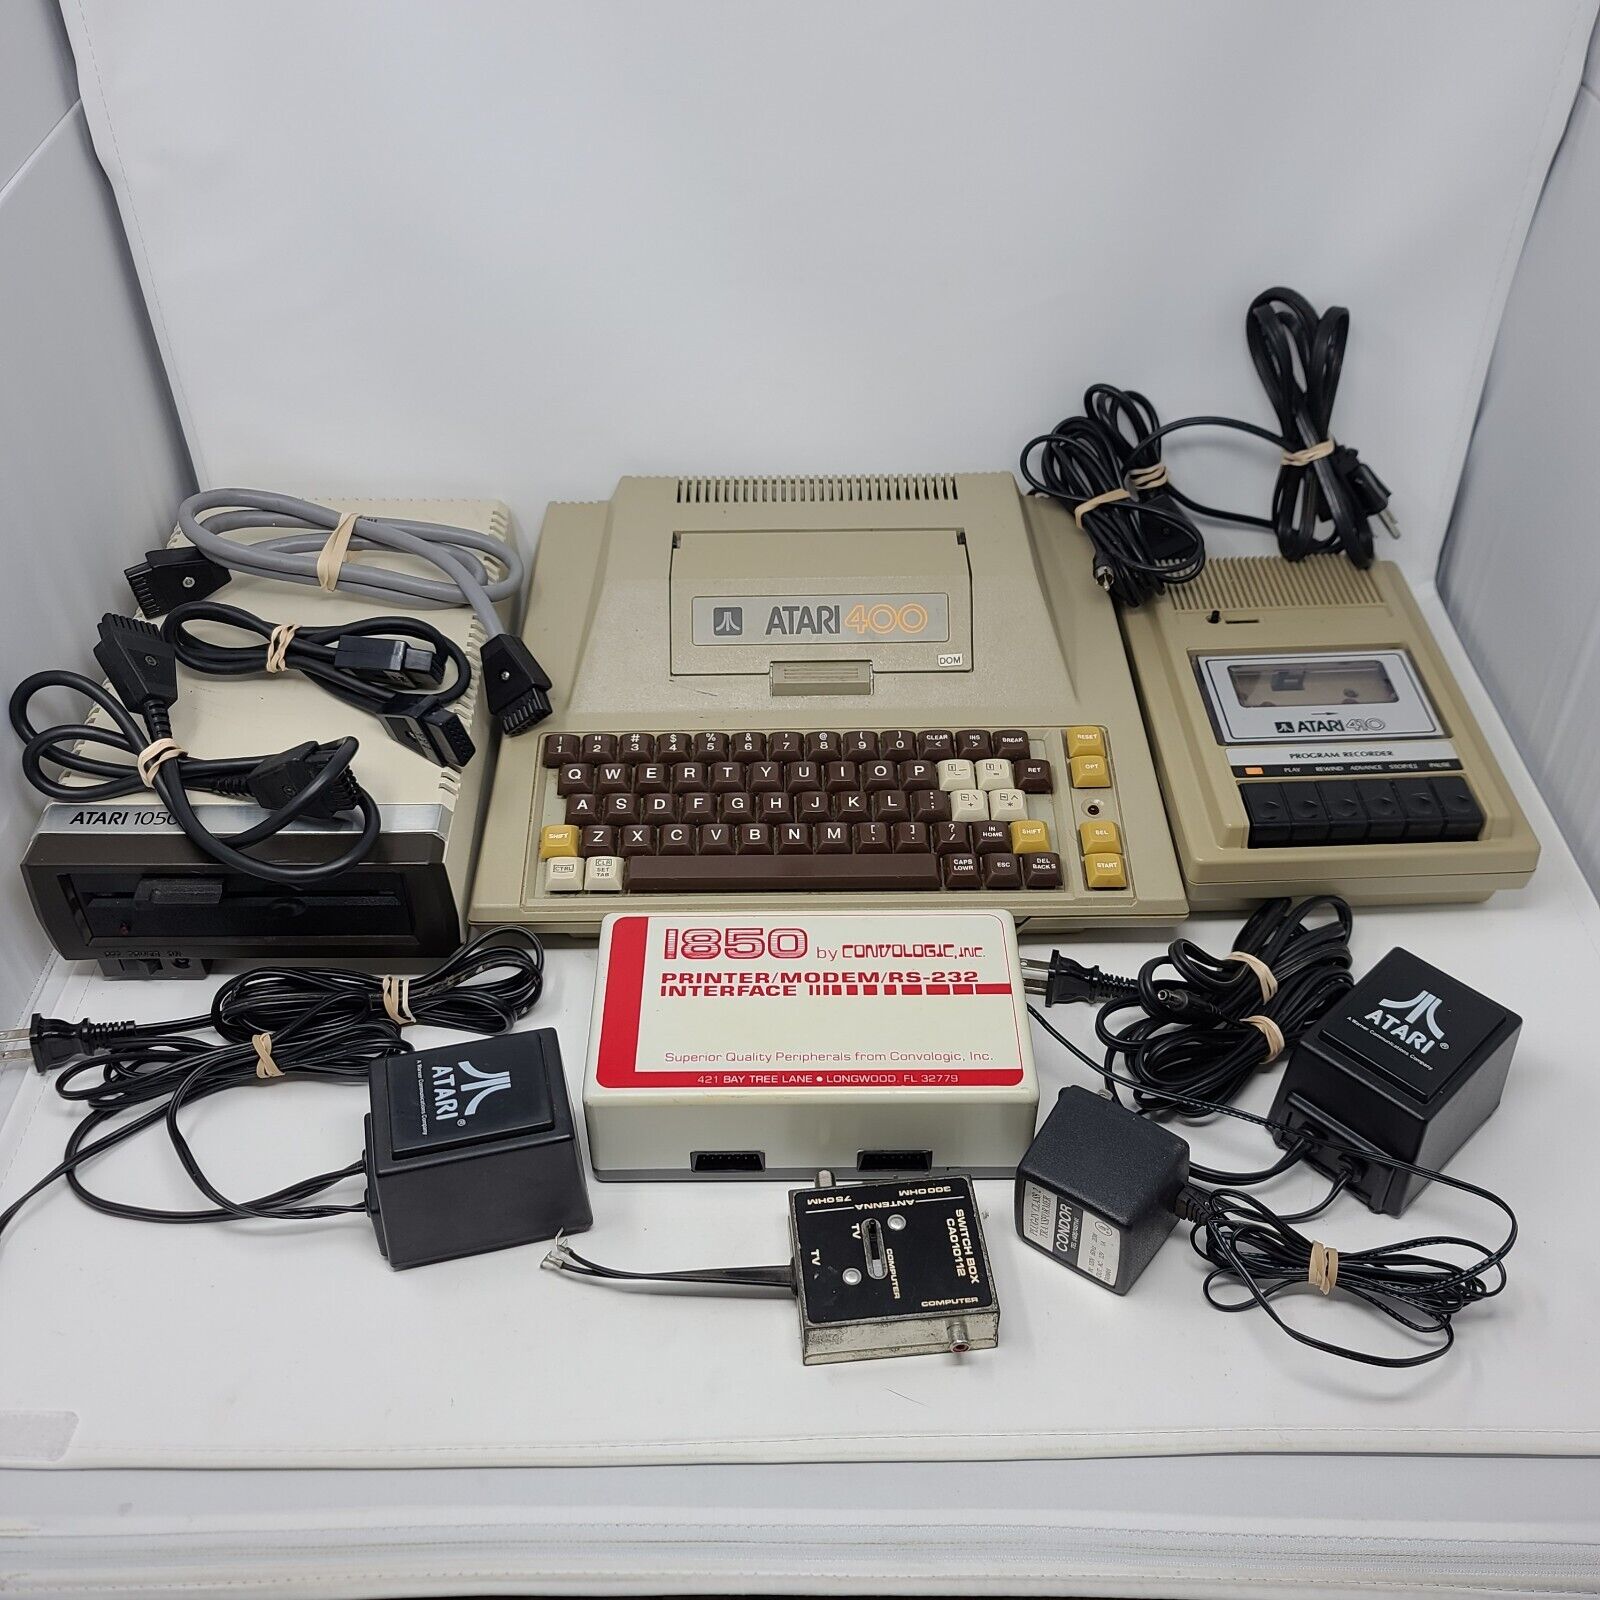 Vintage Atari 400 Bundle with 1050, 410, and Accessories UNTESTED - PARTS ONLY